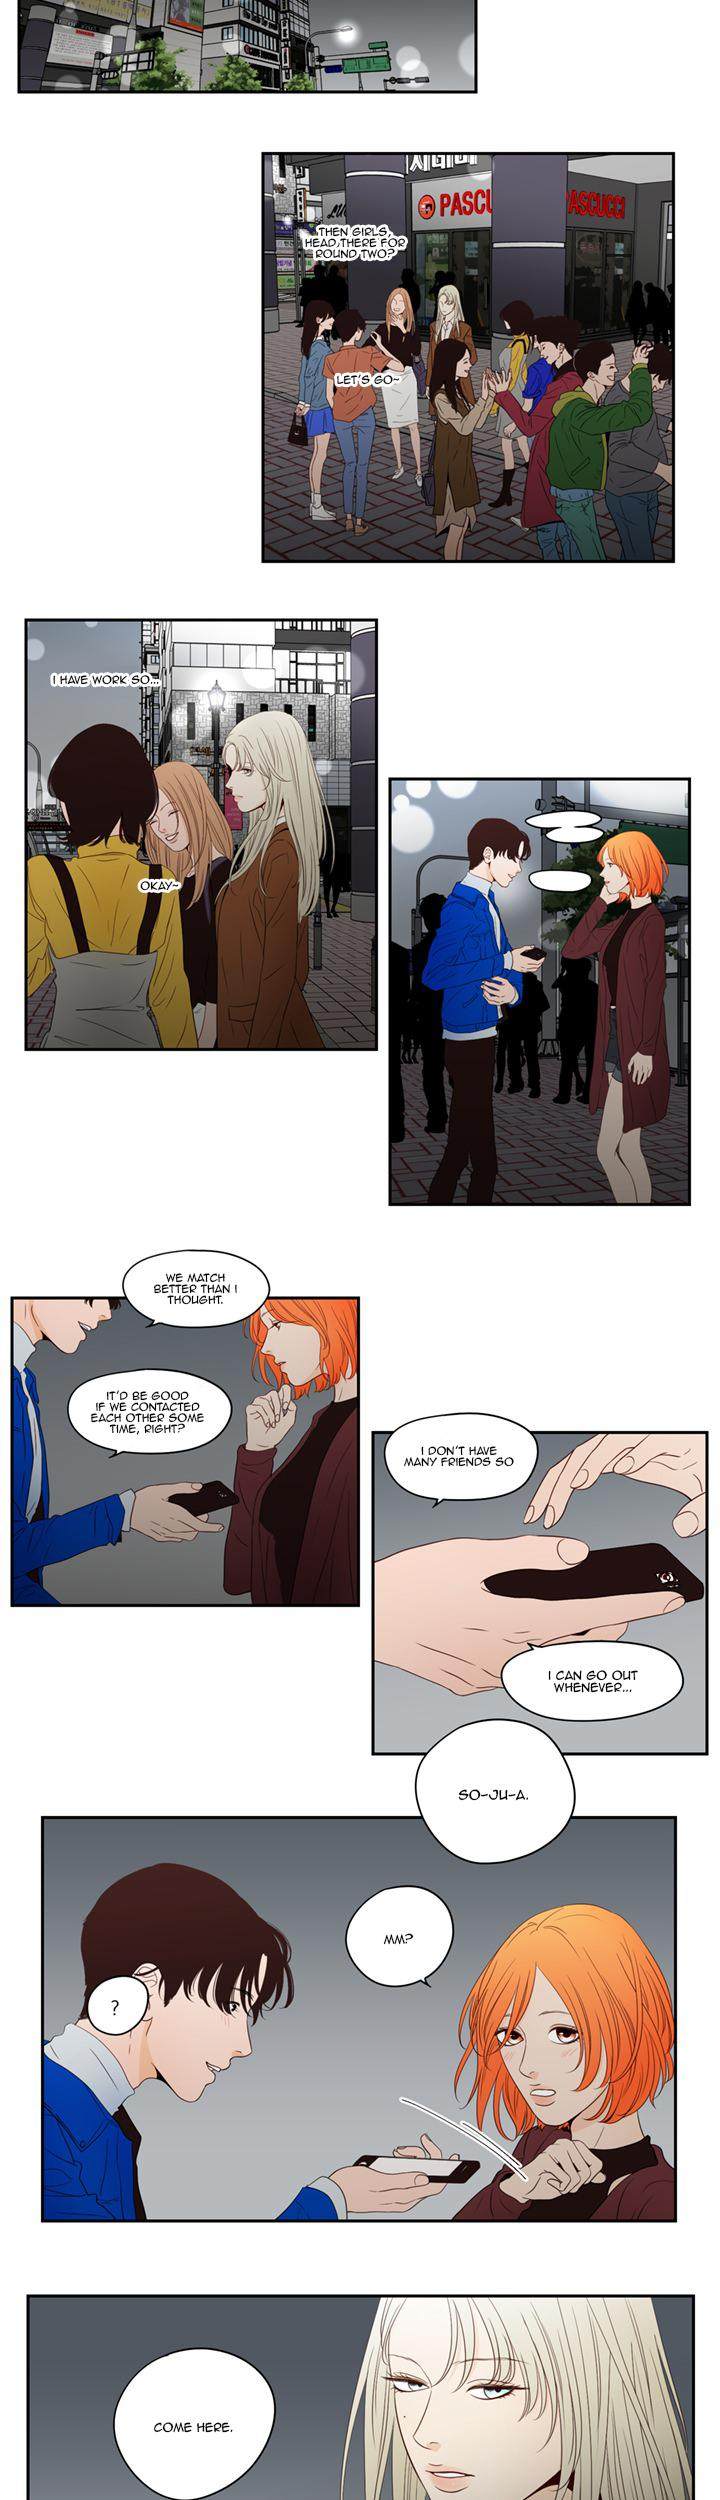 Pet’s Aesthetics - Chapter 4 Page 4